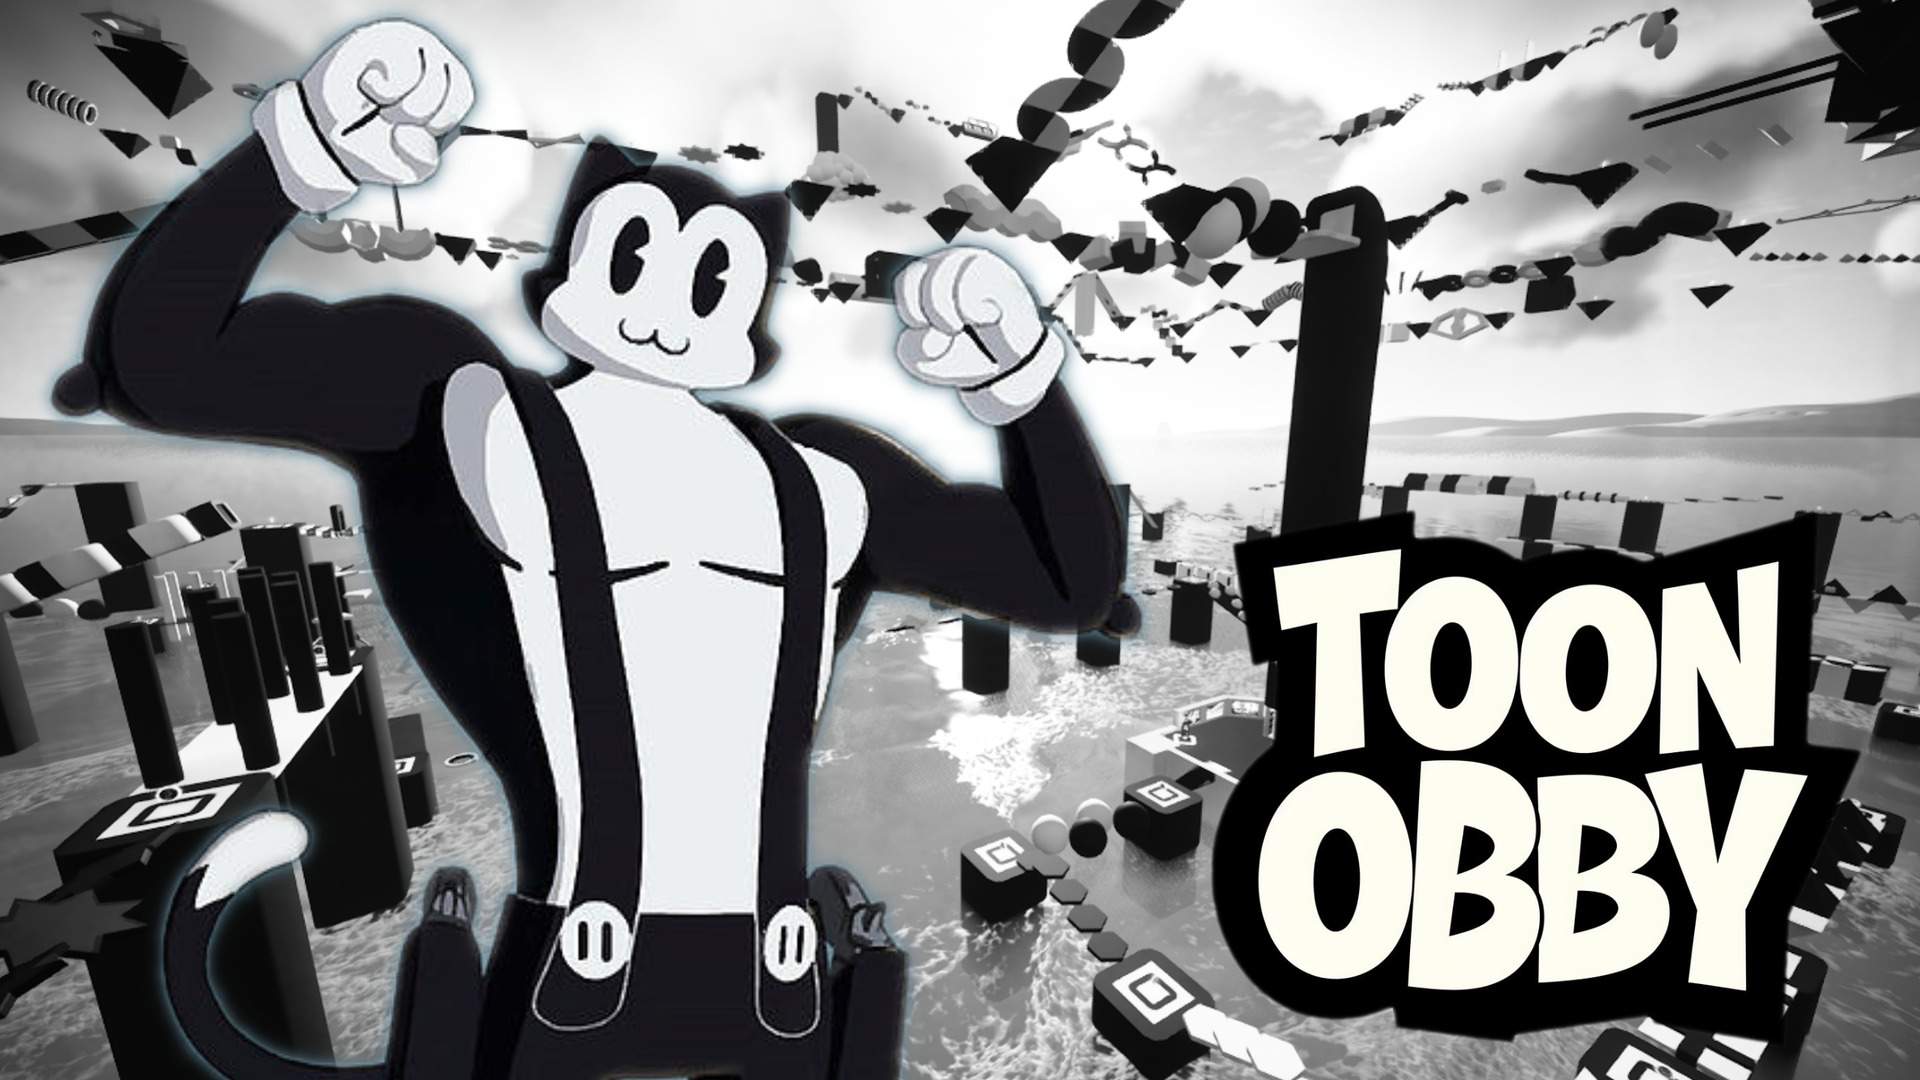 Toon🏁Obby 300+ Levels